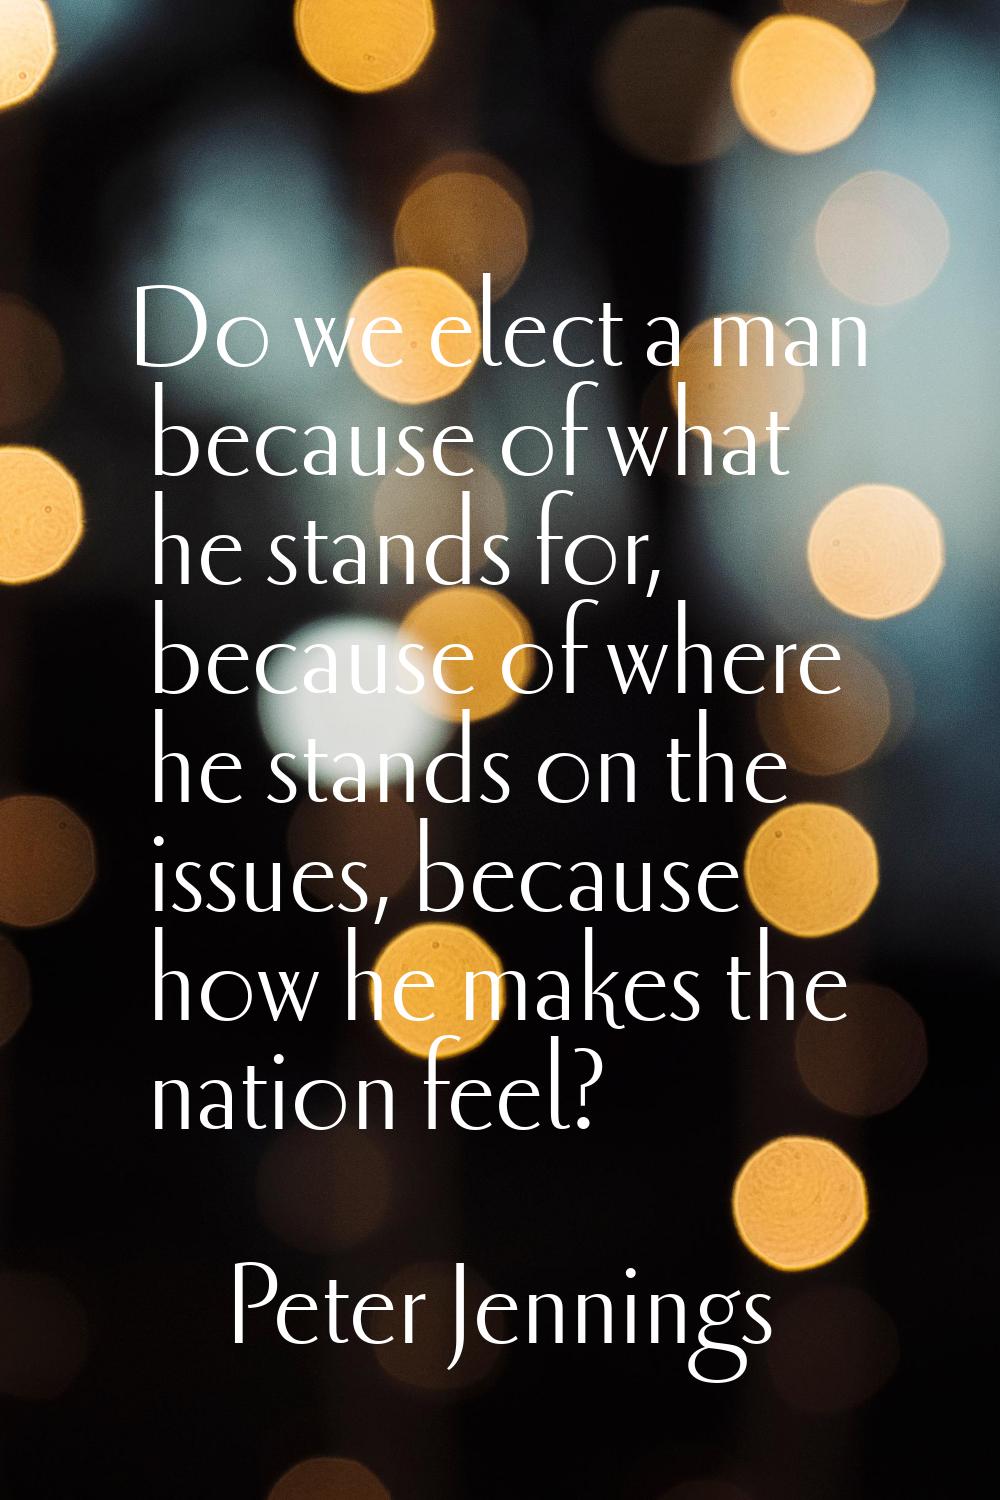 Do we elect a man because of what he stands for, because of where he stands on the issues, because 